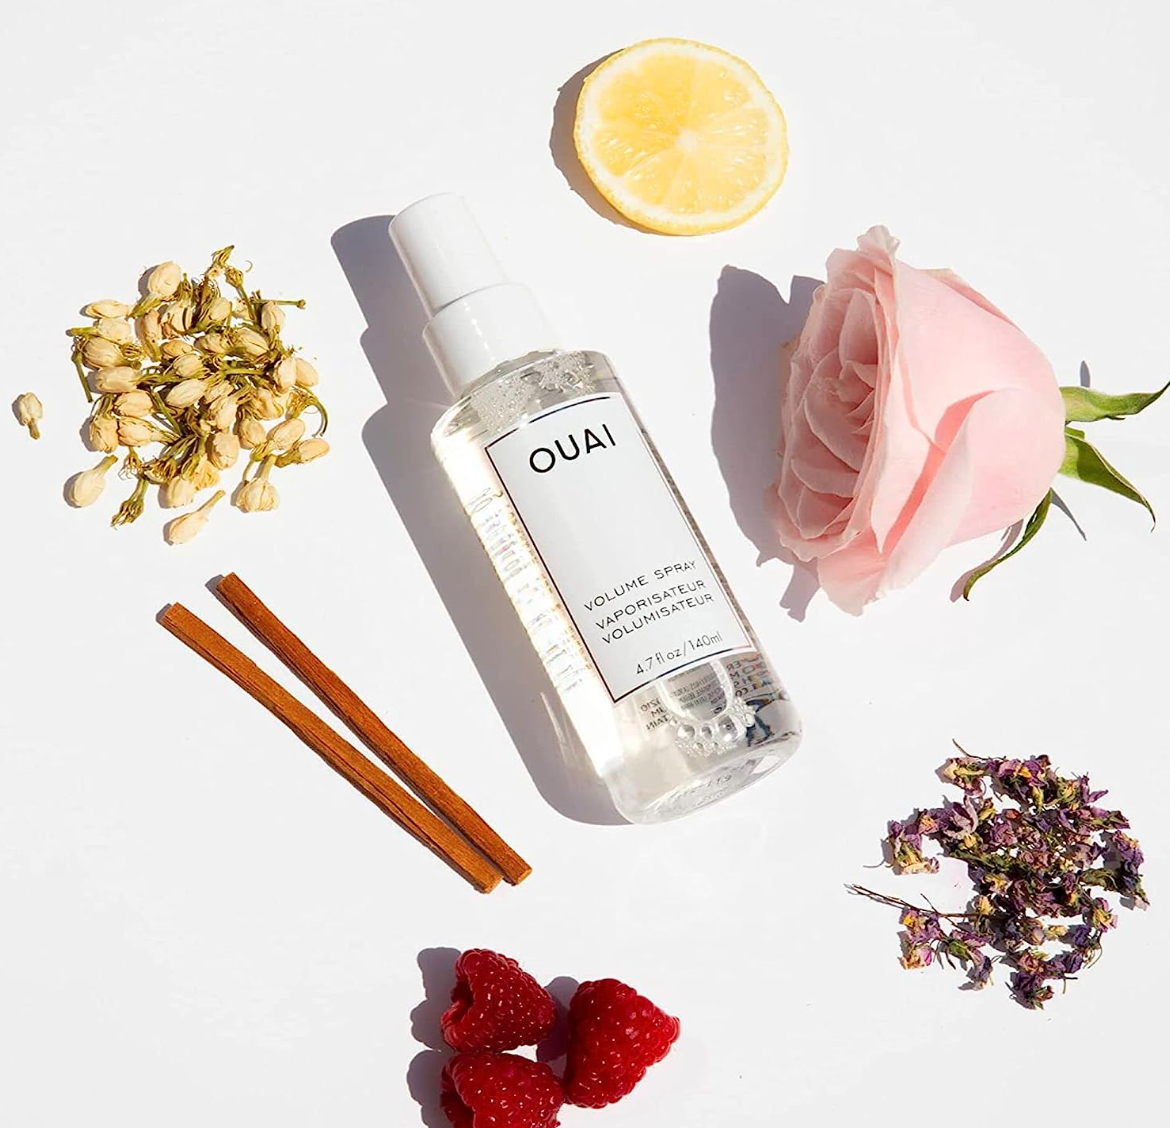 OUAI Volume Spray. A Weightless, Pre-Blowout Mist for Long-Lasting Thickness, Volume and Bounce. Made with Volume Polymers and Hibiscus Extract. Free from Parabens and Sulfates (4.7 Oz)